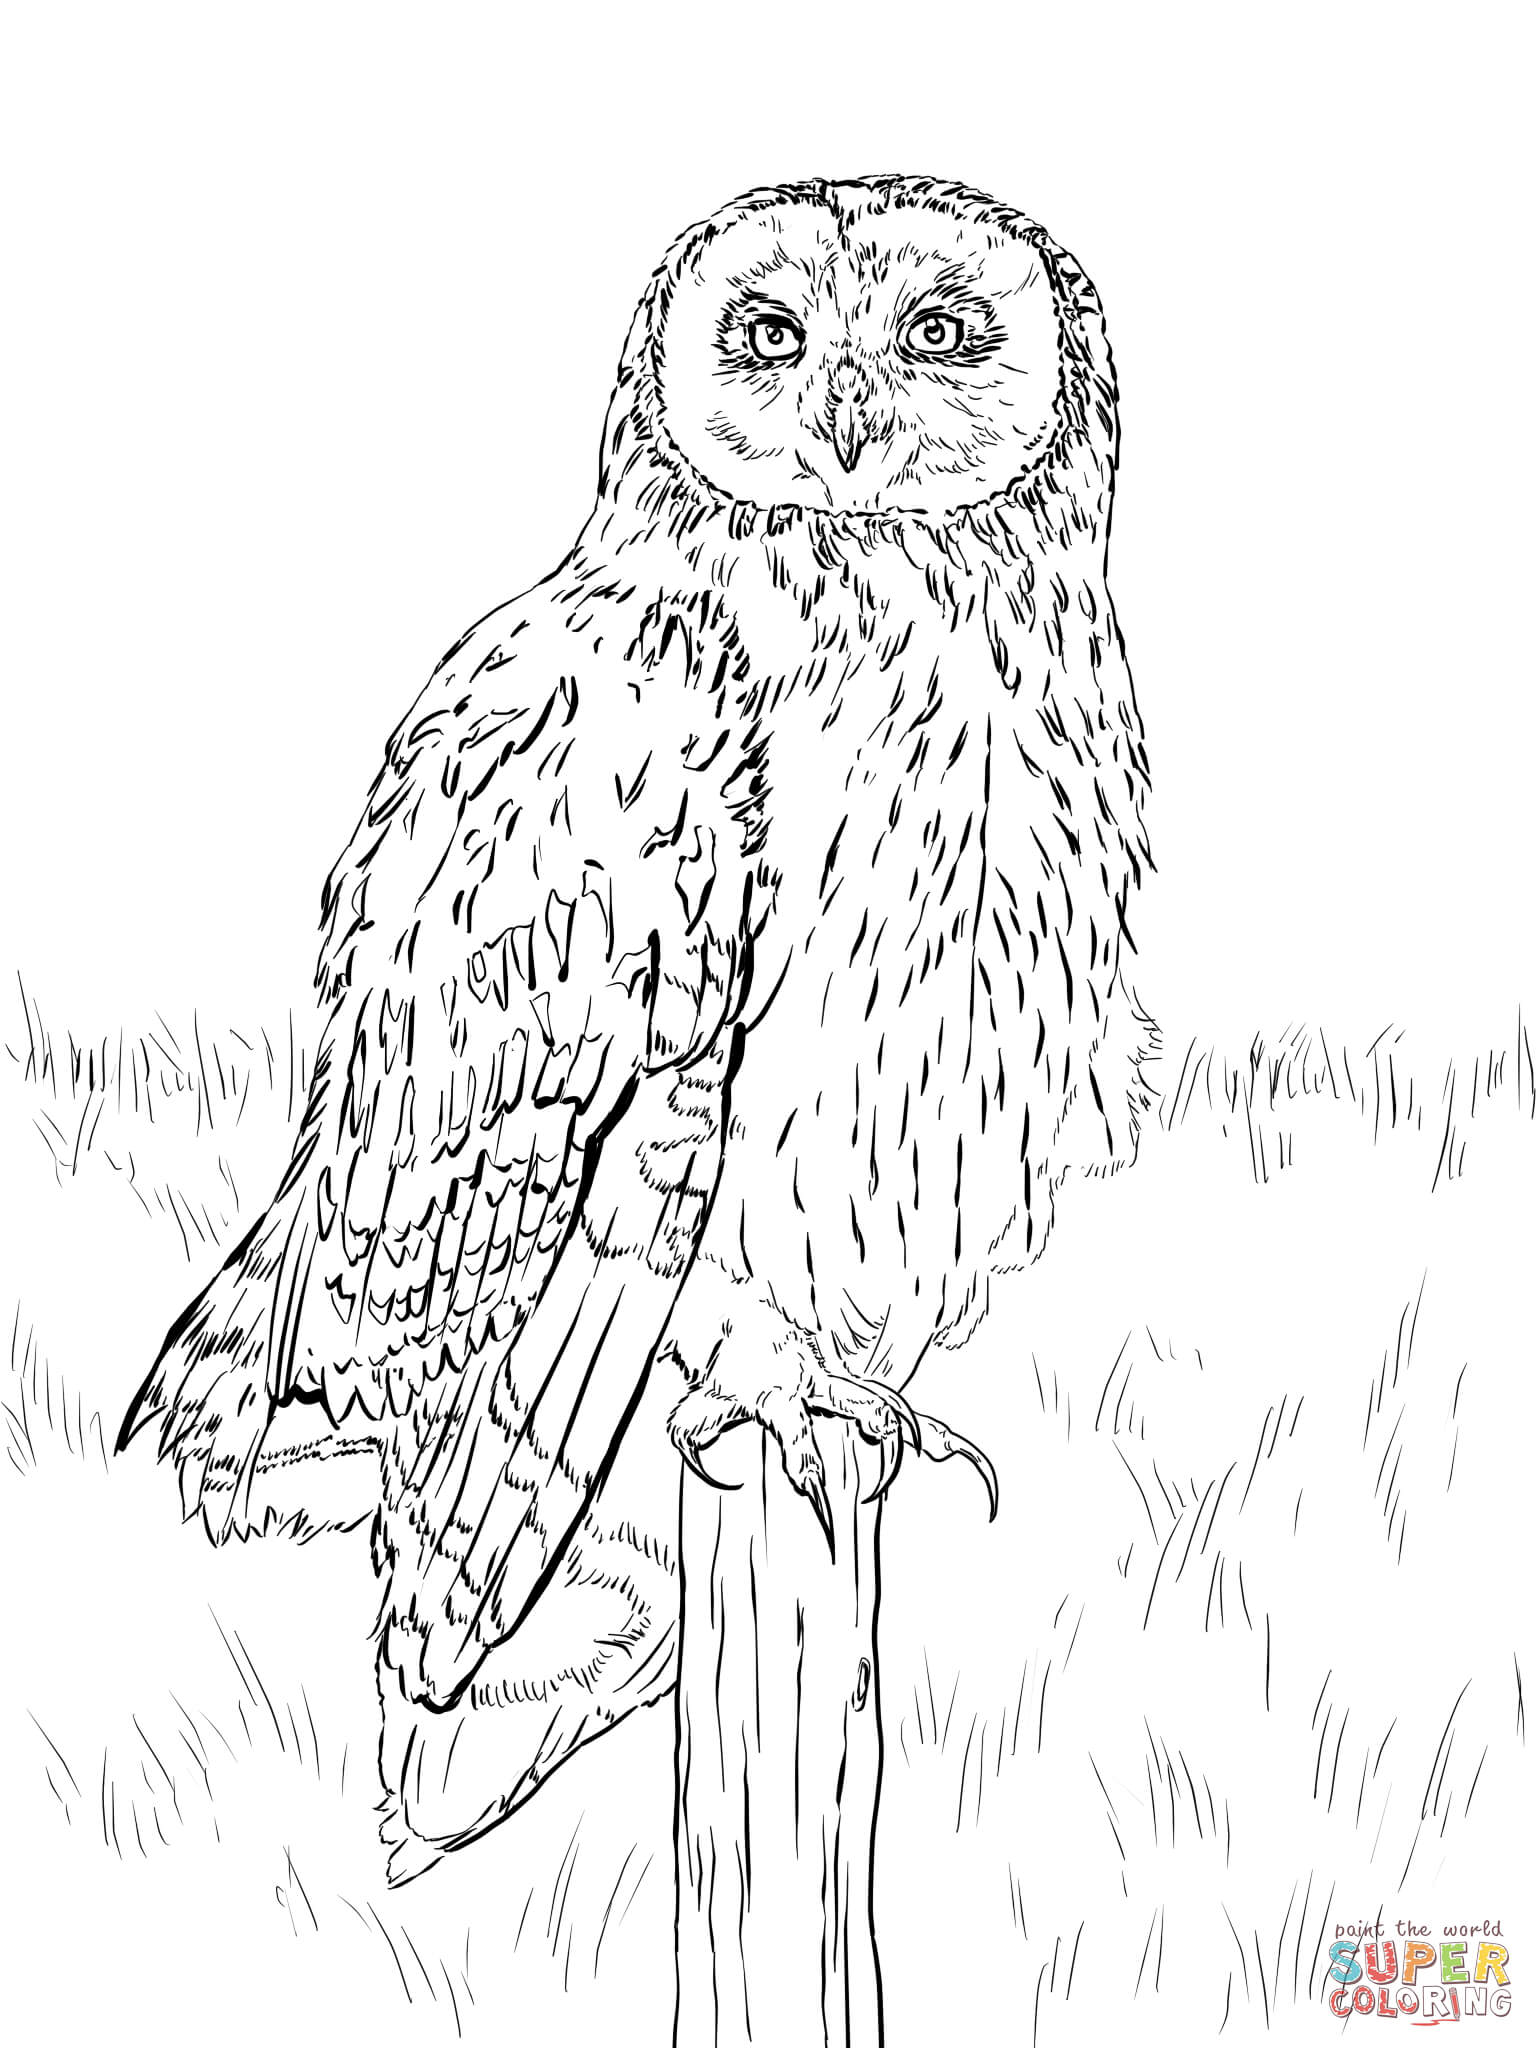 Nocturnal animals coloring pages | Free Printable Pictures